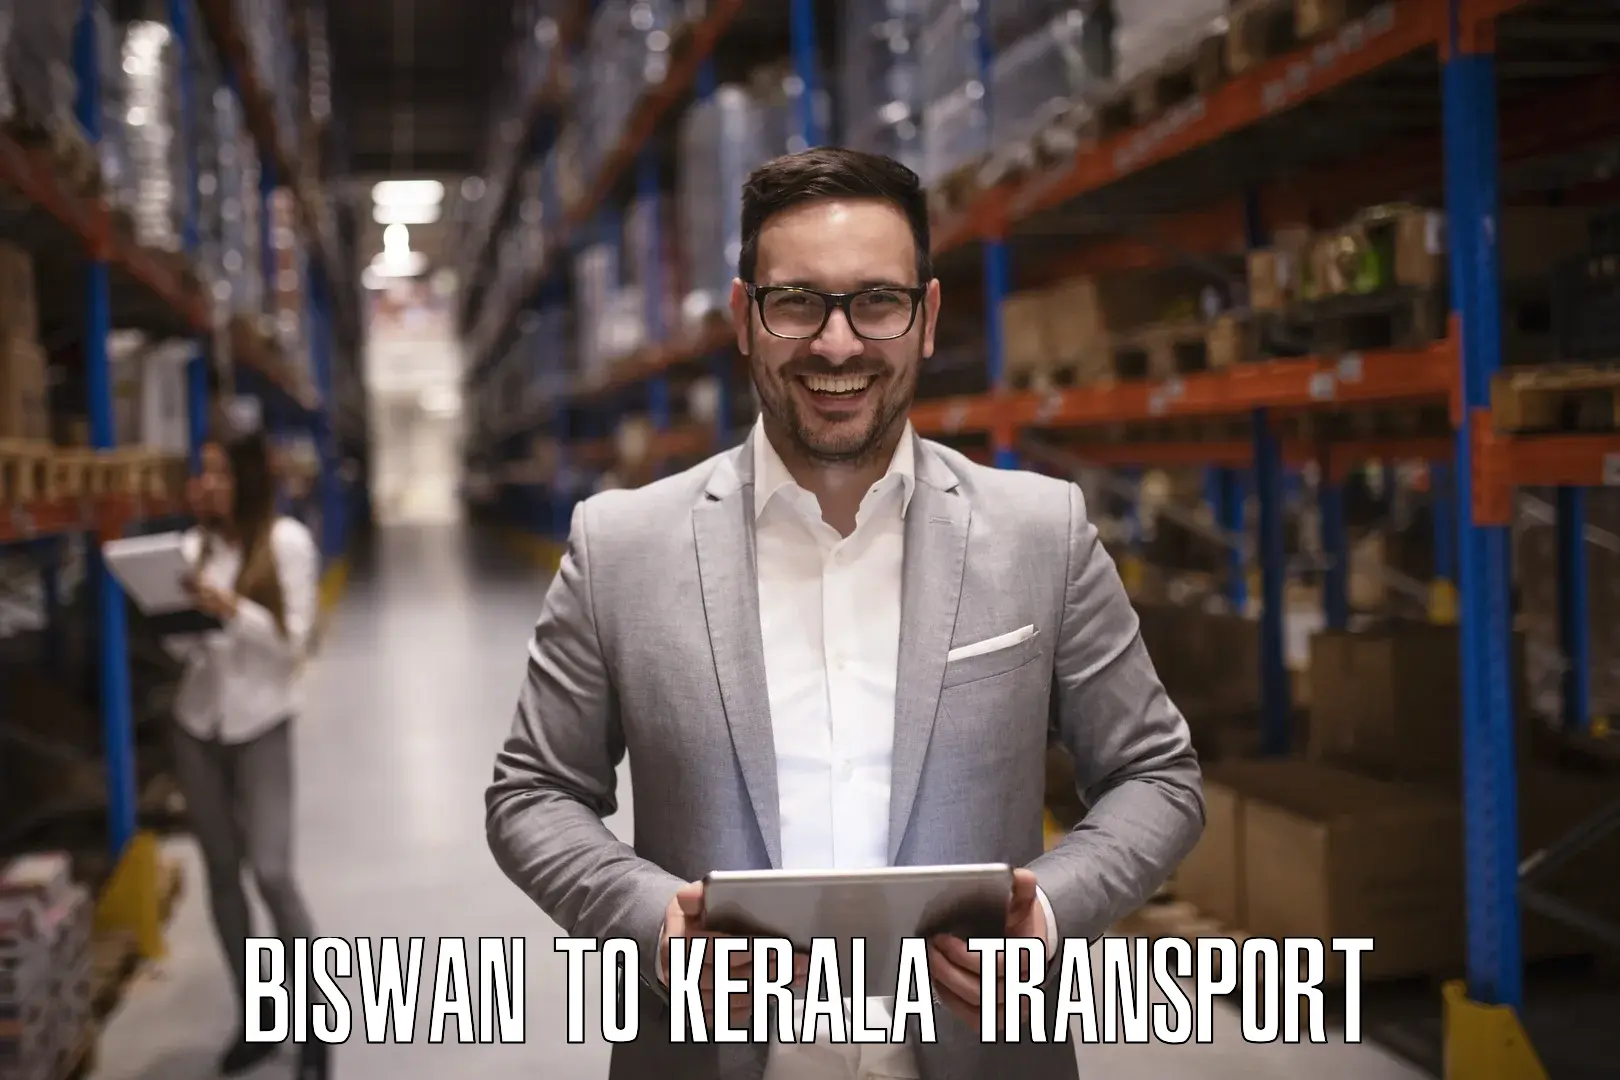 Commercial transport service in Biswan to Kochi